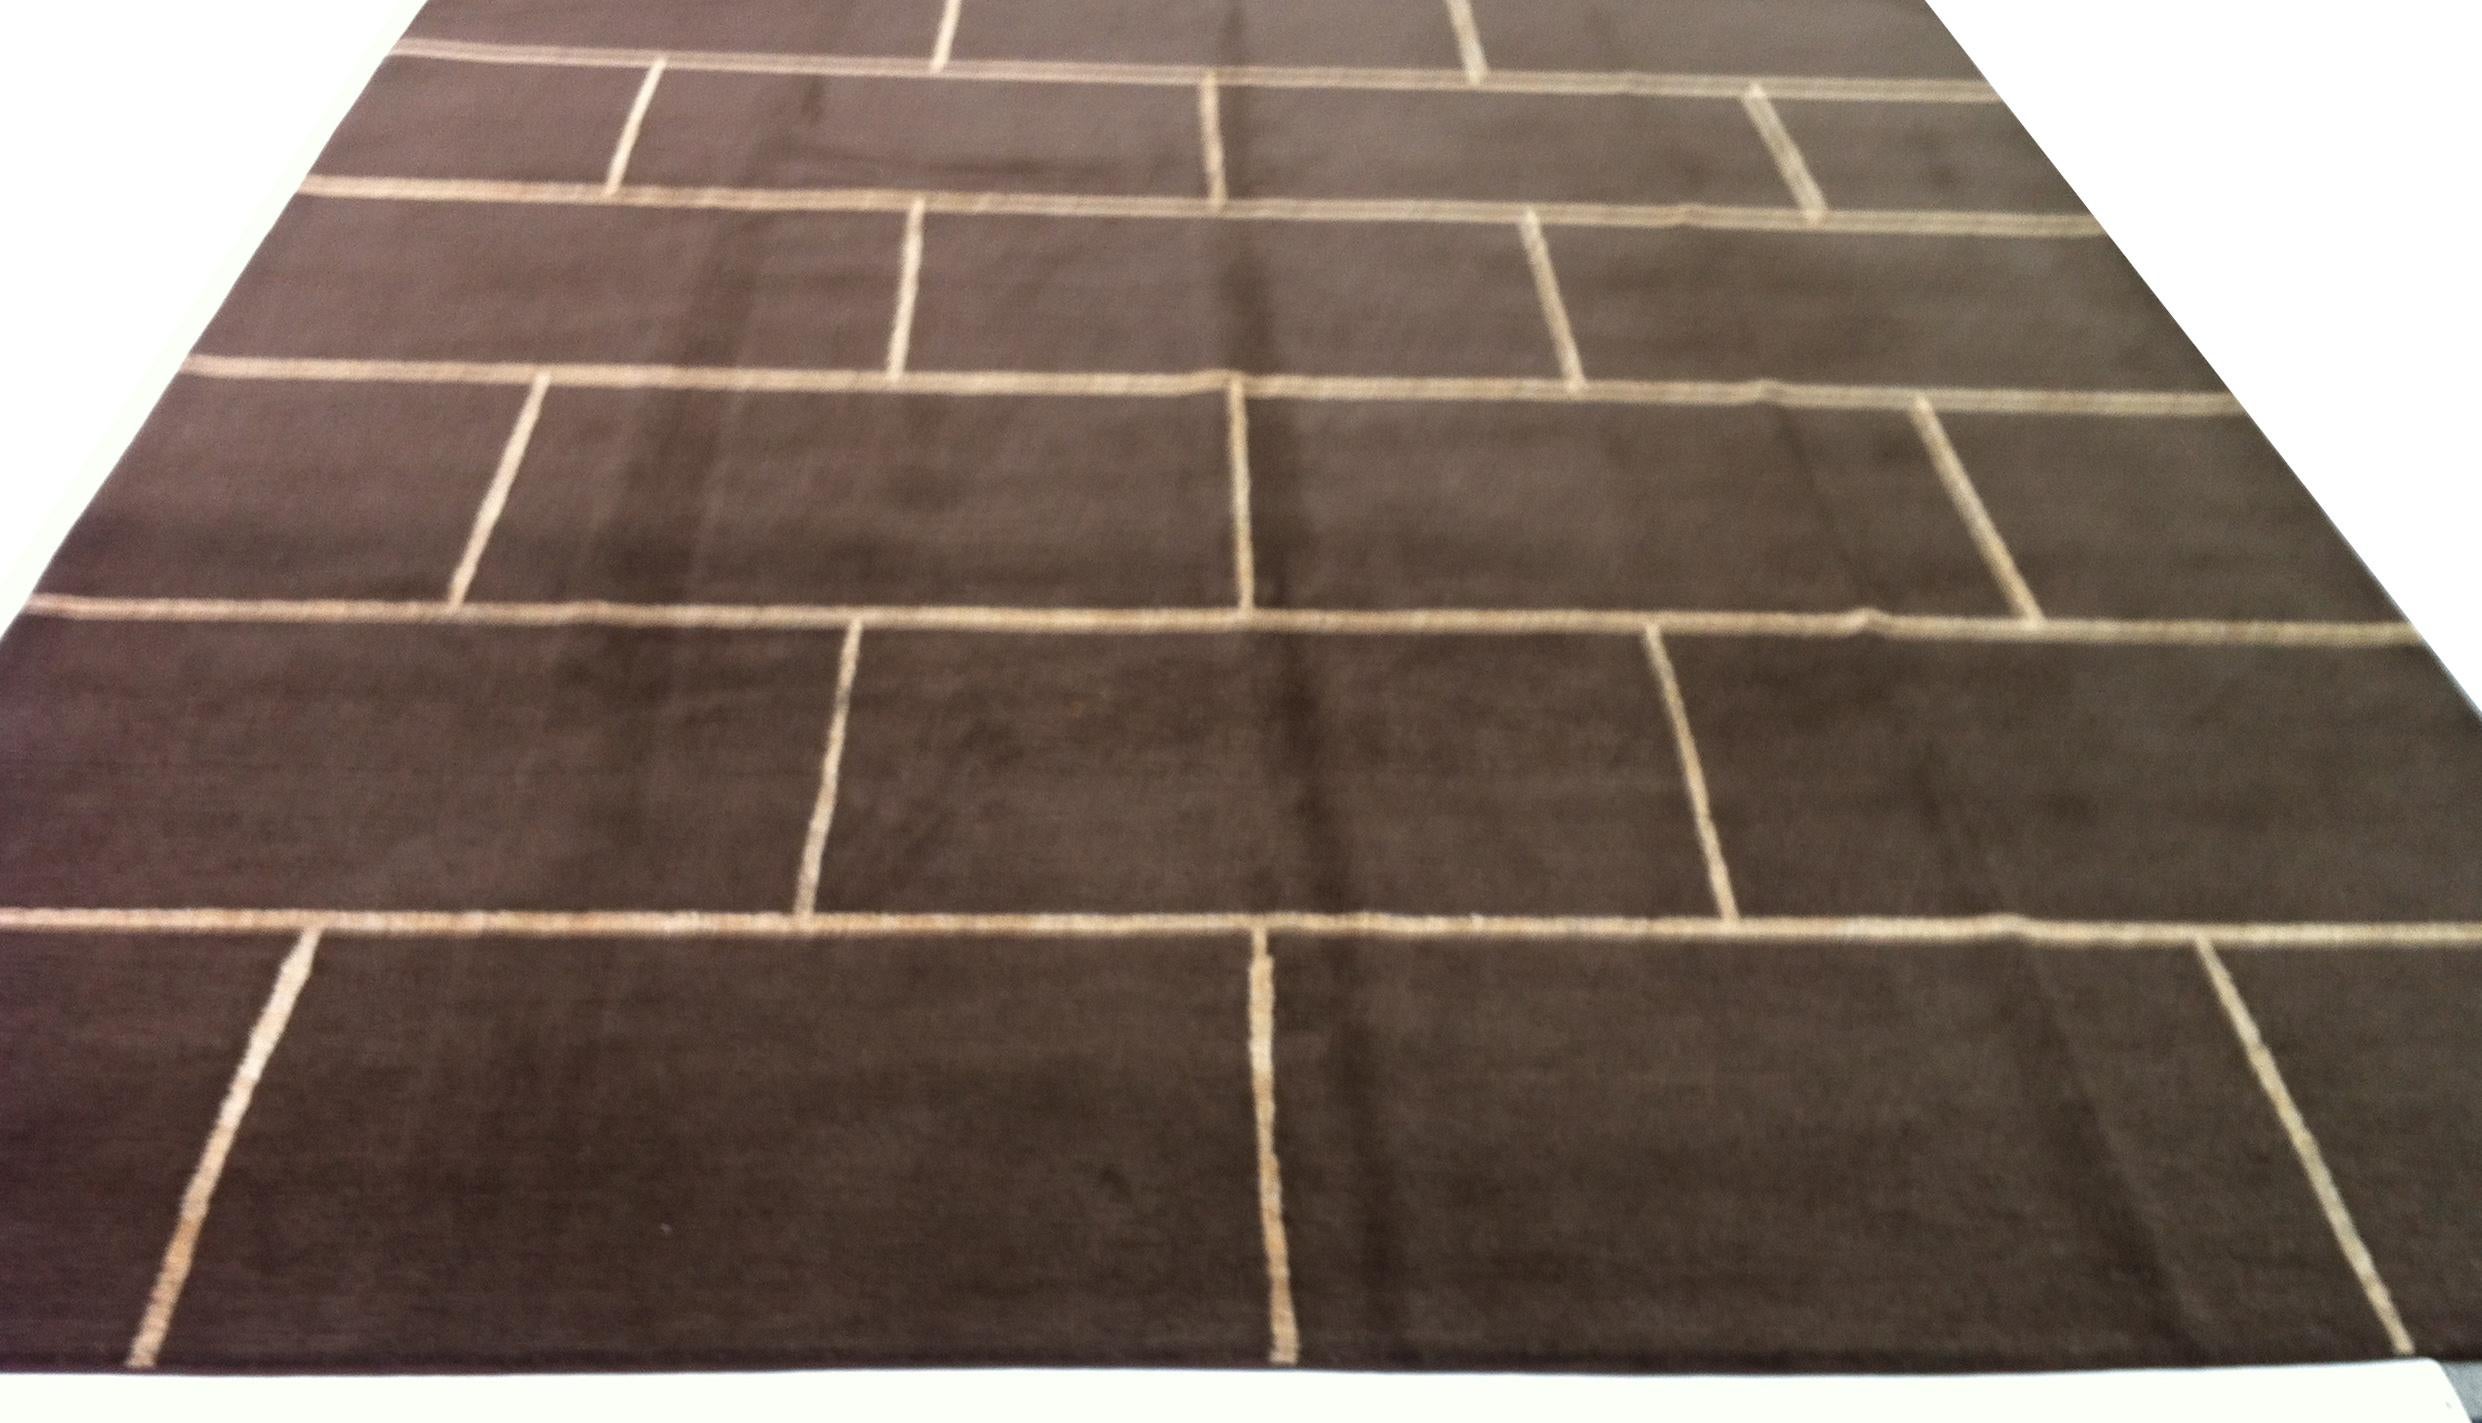 Build a strong foundation to showcase other design elements with a warm chocolate brown and cream area rug. Brown and cream tones offer a variety of possibilities for integration with other textures and color palettes. A wool/silk blend creates a